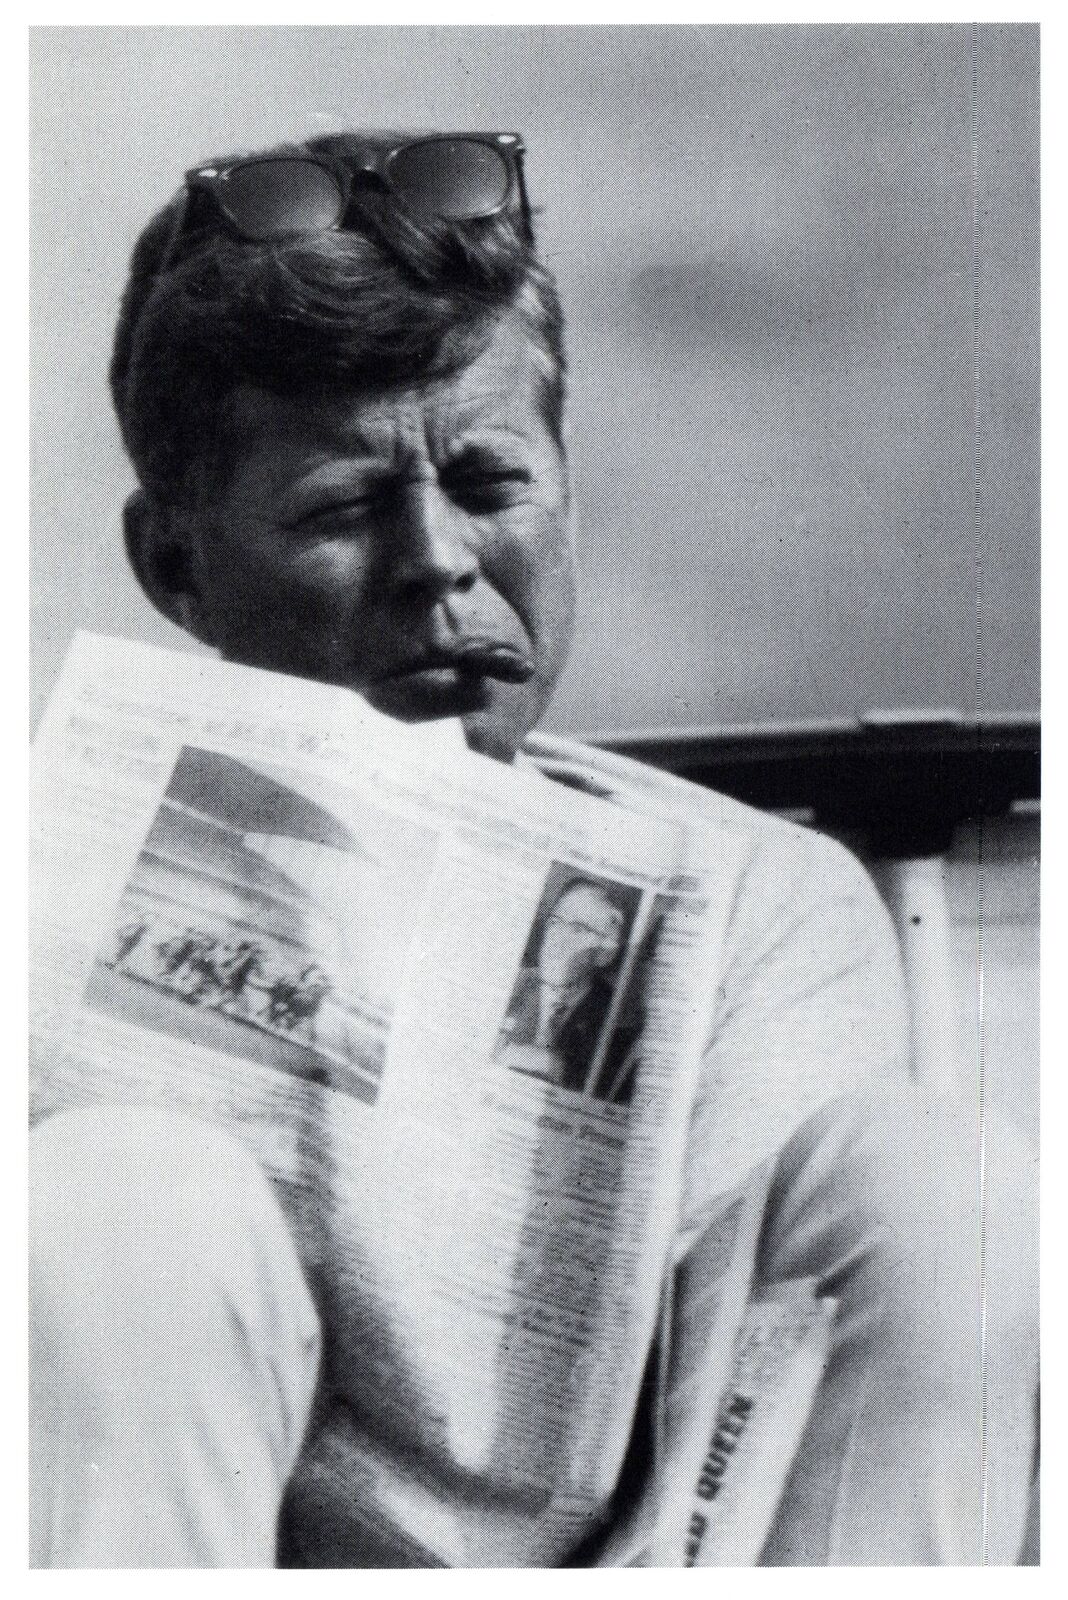 CONTINENTAL SIZE POSTCARD REPRODUCTION OF JOHN F. KENNEDY READING c. 1960